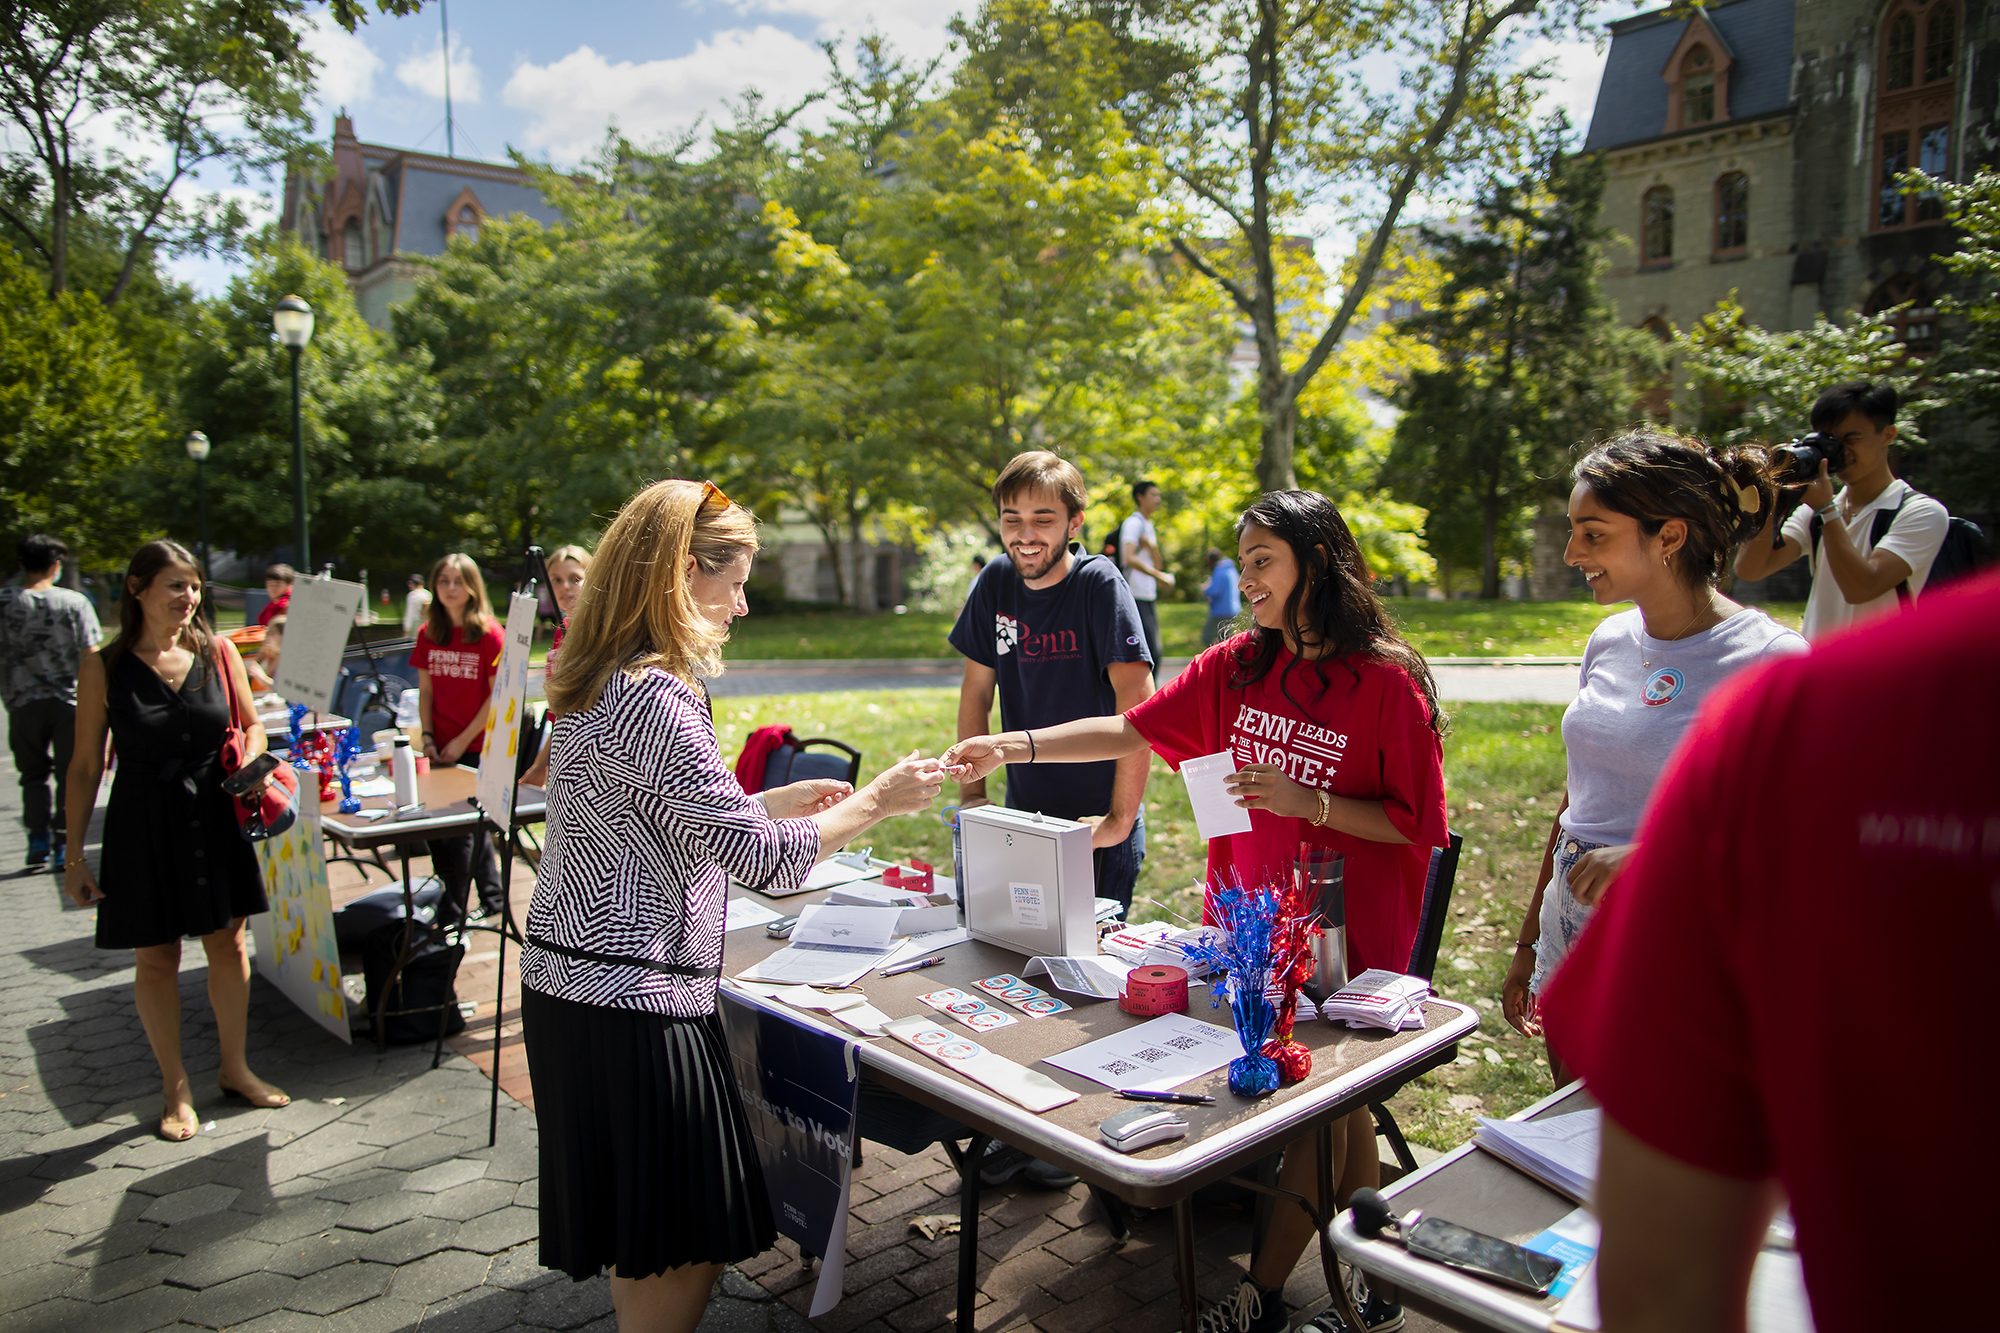 Penn President Liz Magill visits a Penn Leads the Vote table on College Green.